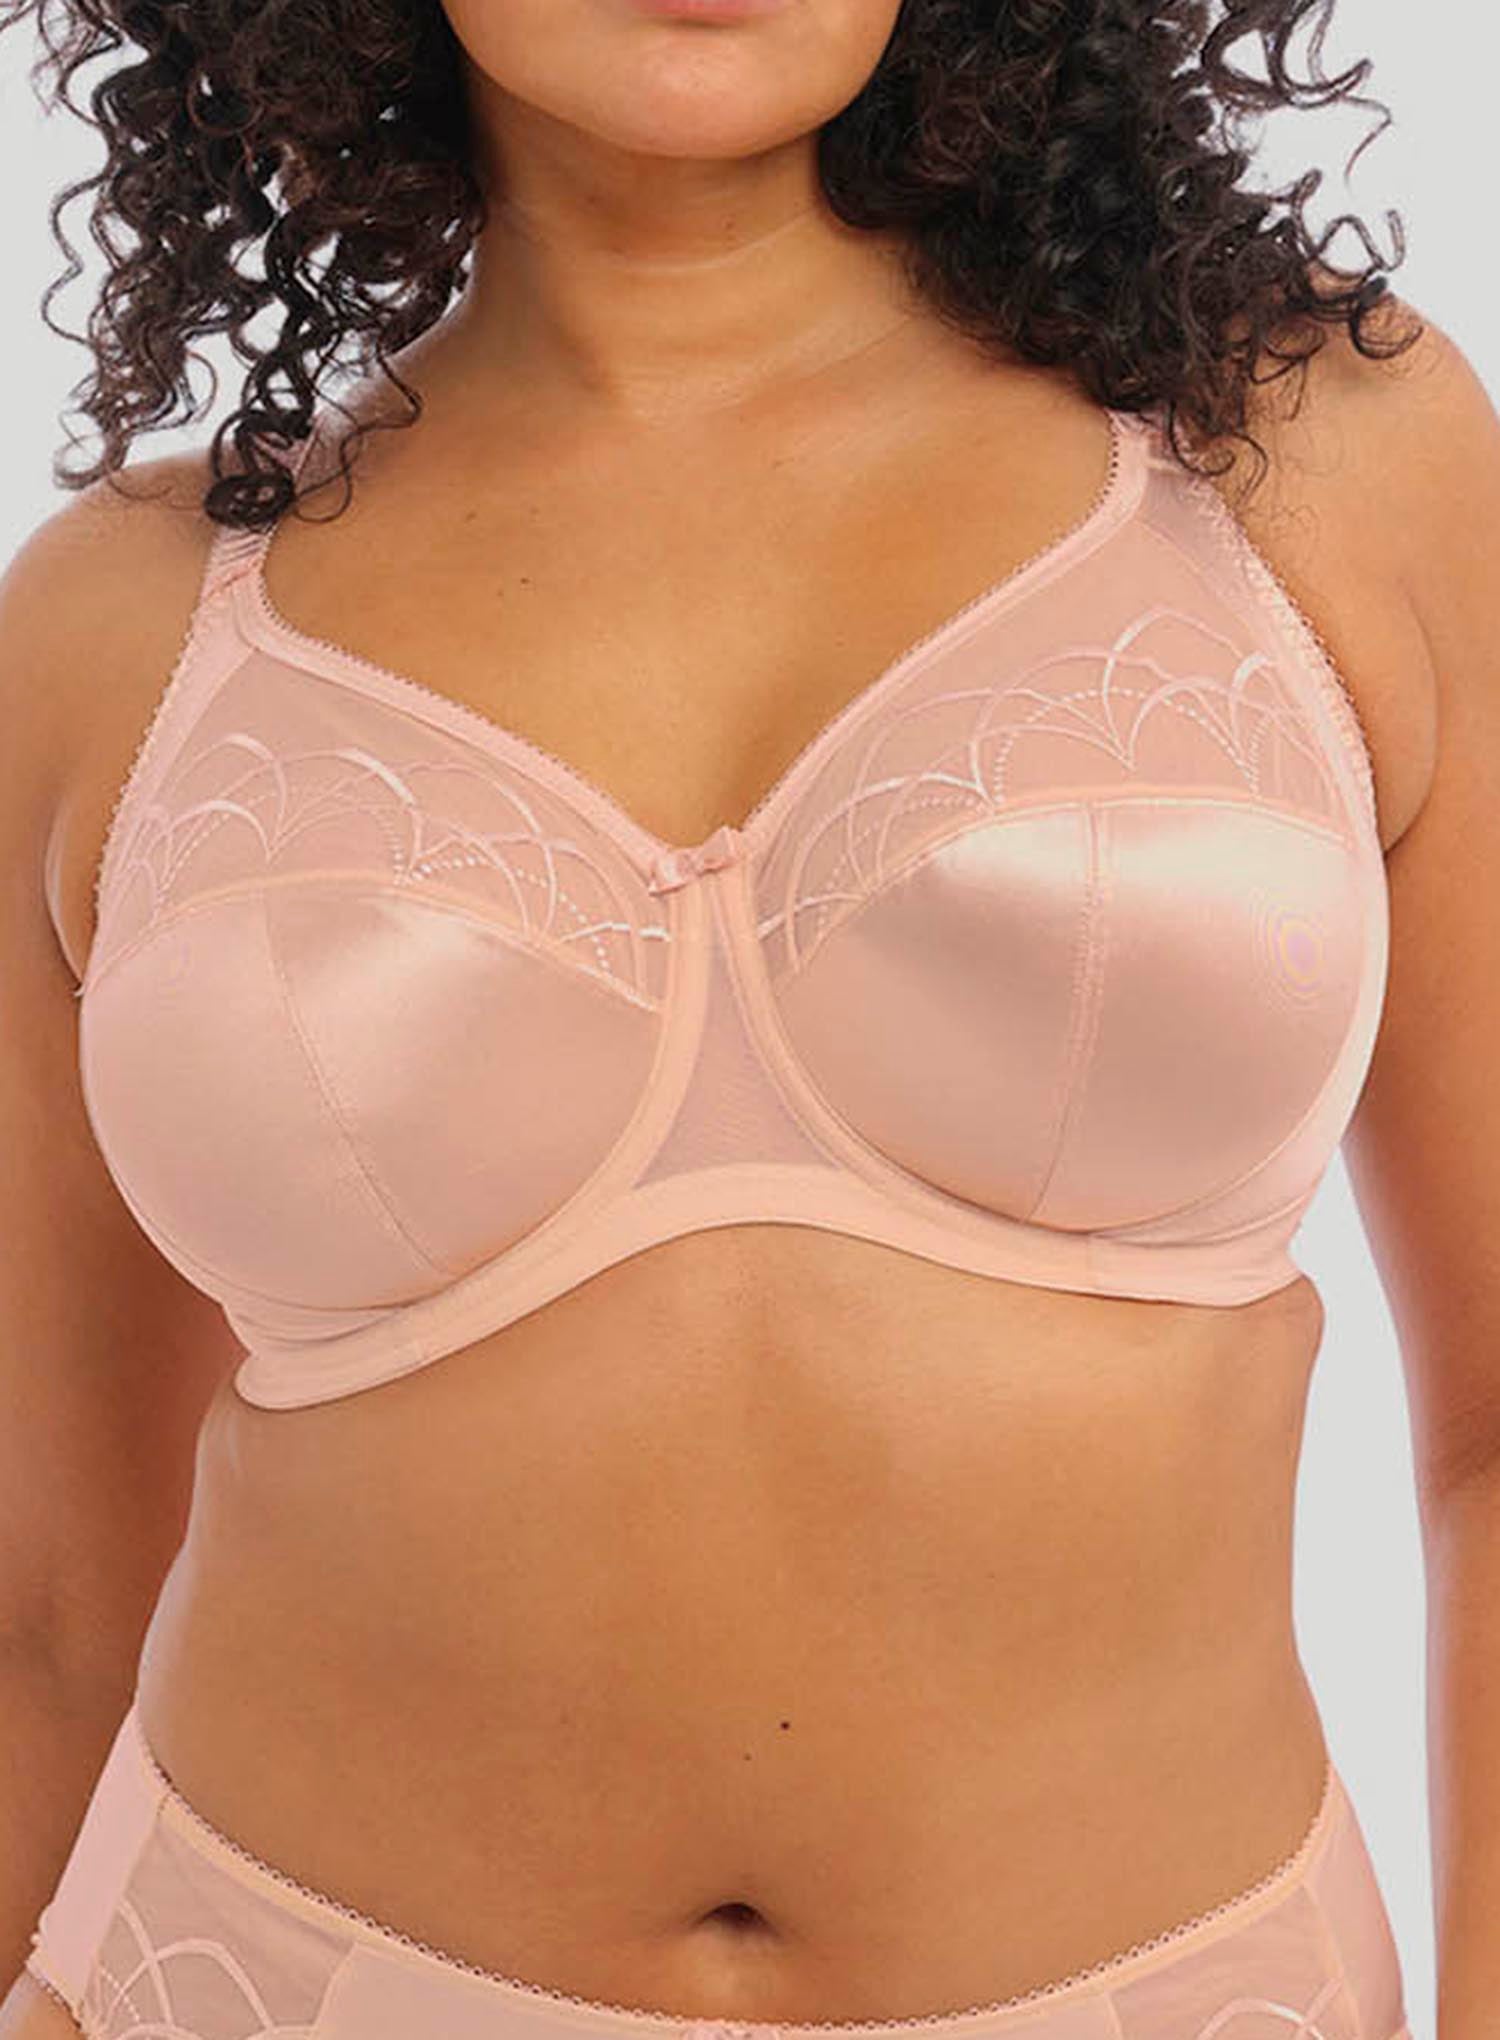  Elomi Womens Plus-Size Cate Underwire Full Cup Banded Bra